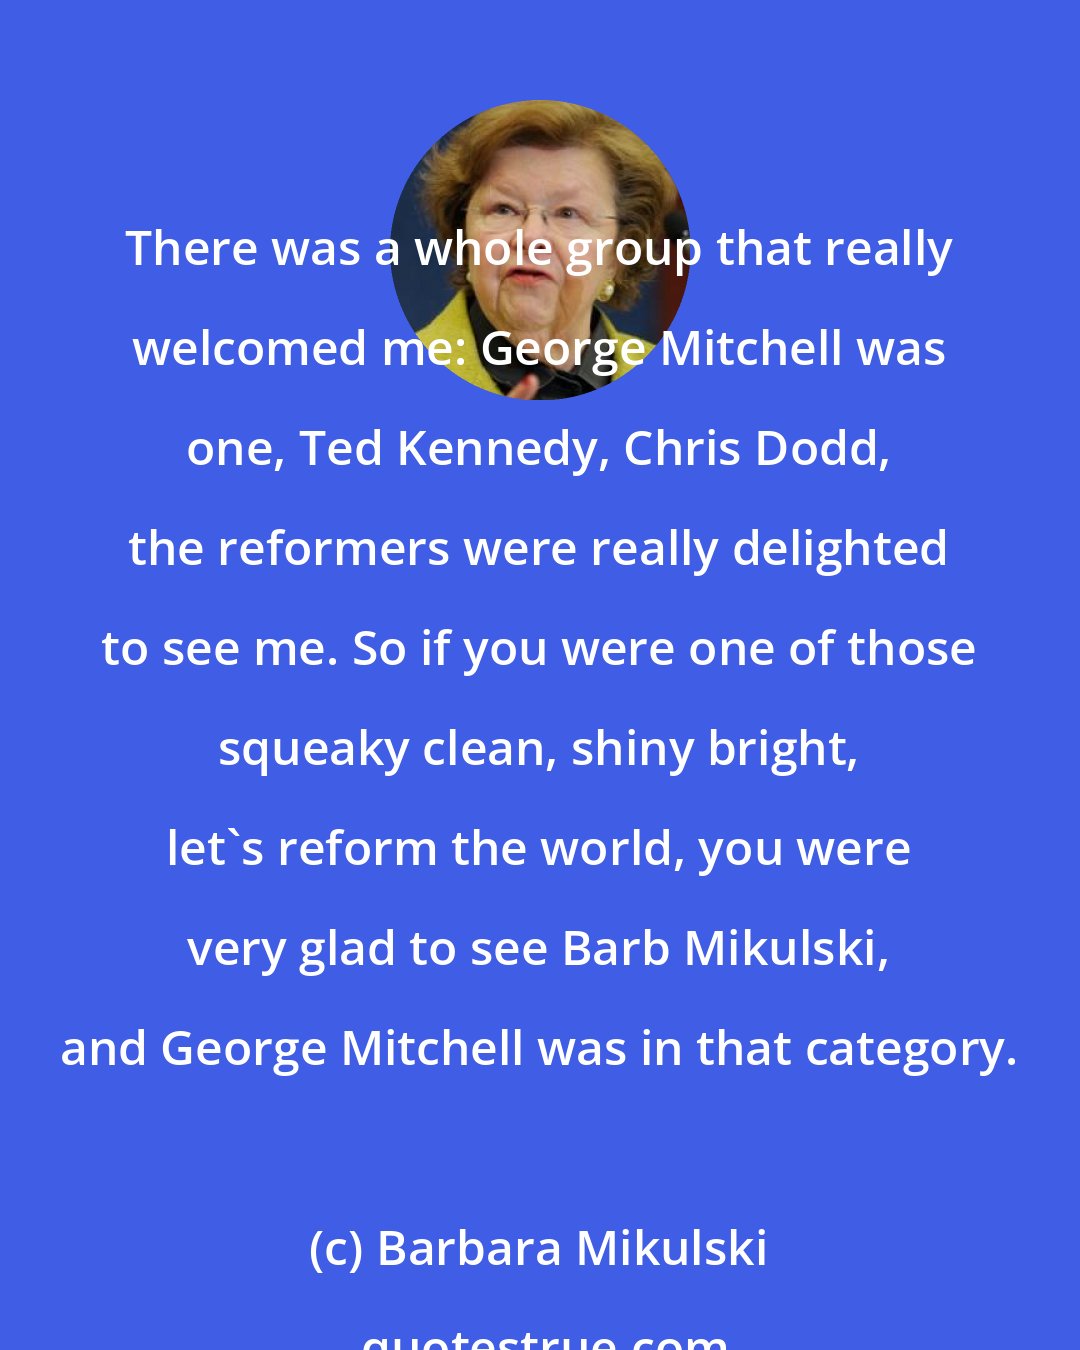 Barbara Mikulski: There was a whole group that really welcomed me: George Mitchell was one, Ted Kennedy, Chris Dodd, the reformers were really delighted to see me. So if you were one of those squeaky clean, shiny bright, let's reform the world, you were very glad to see Barb Mikulski, and George Mitchell was in that category.